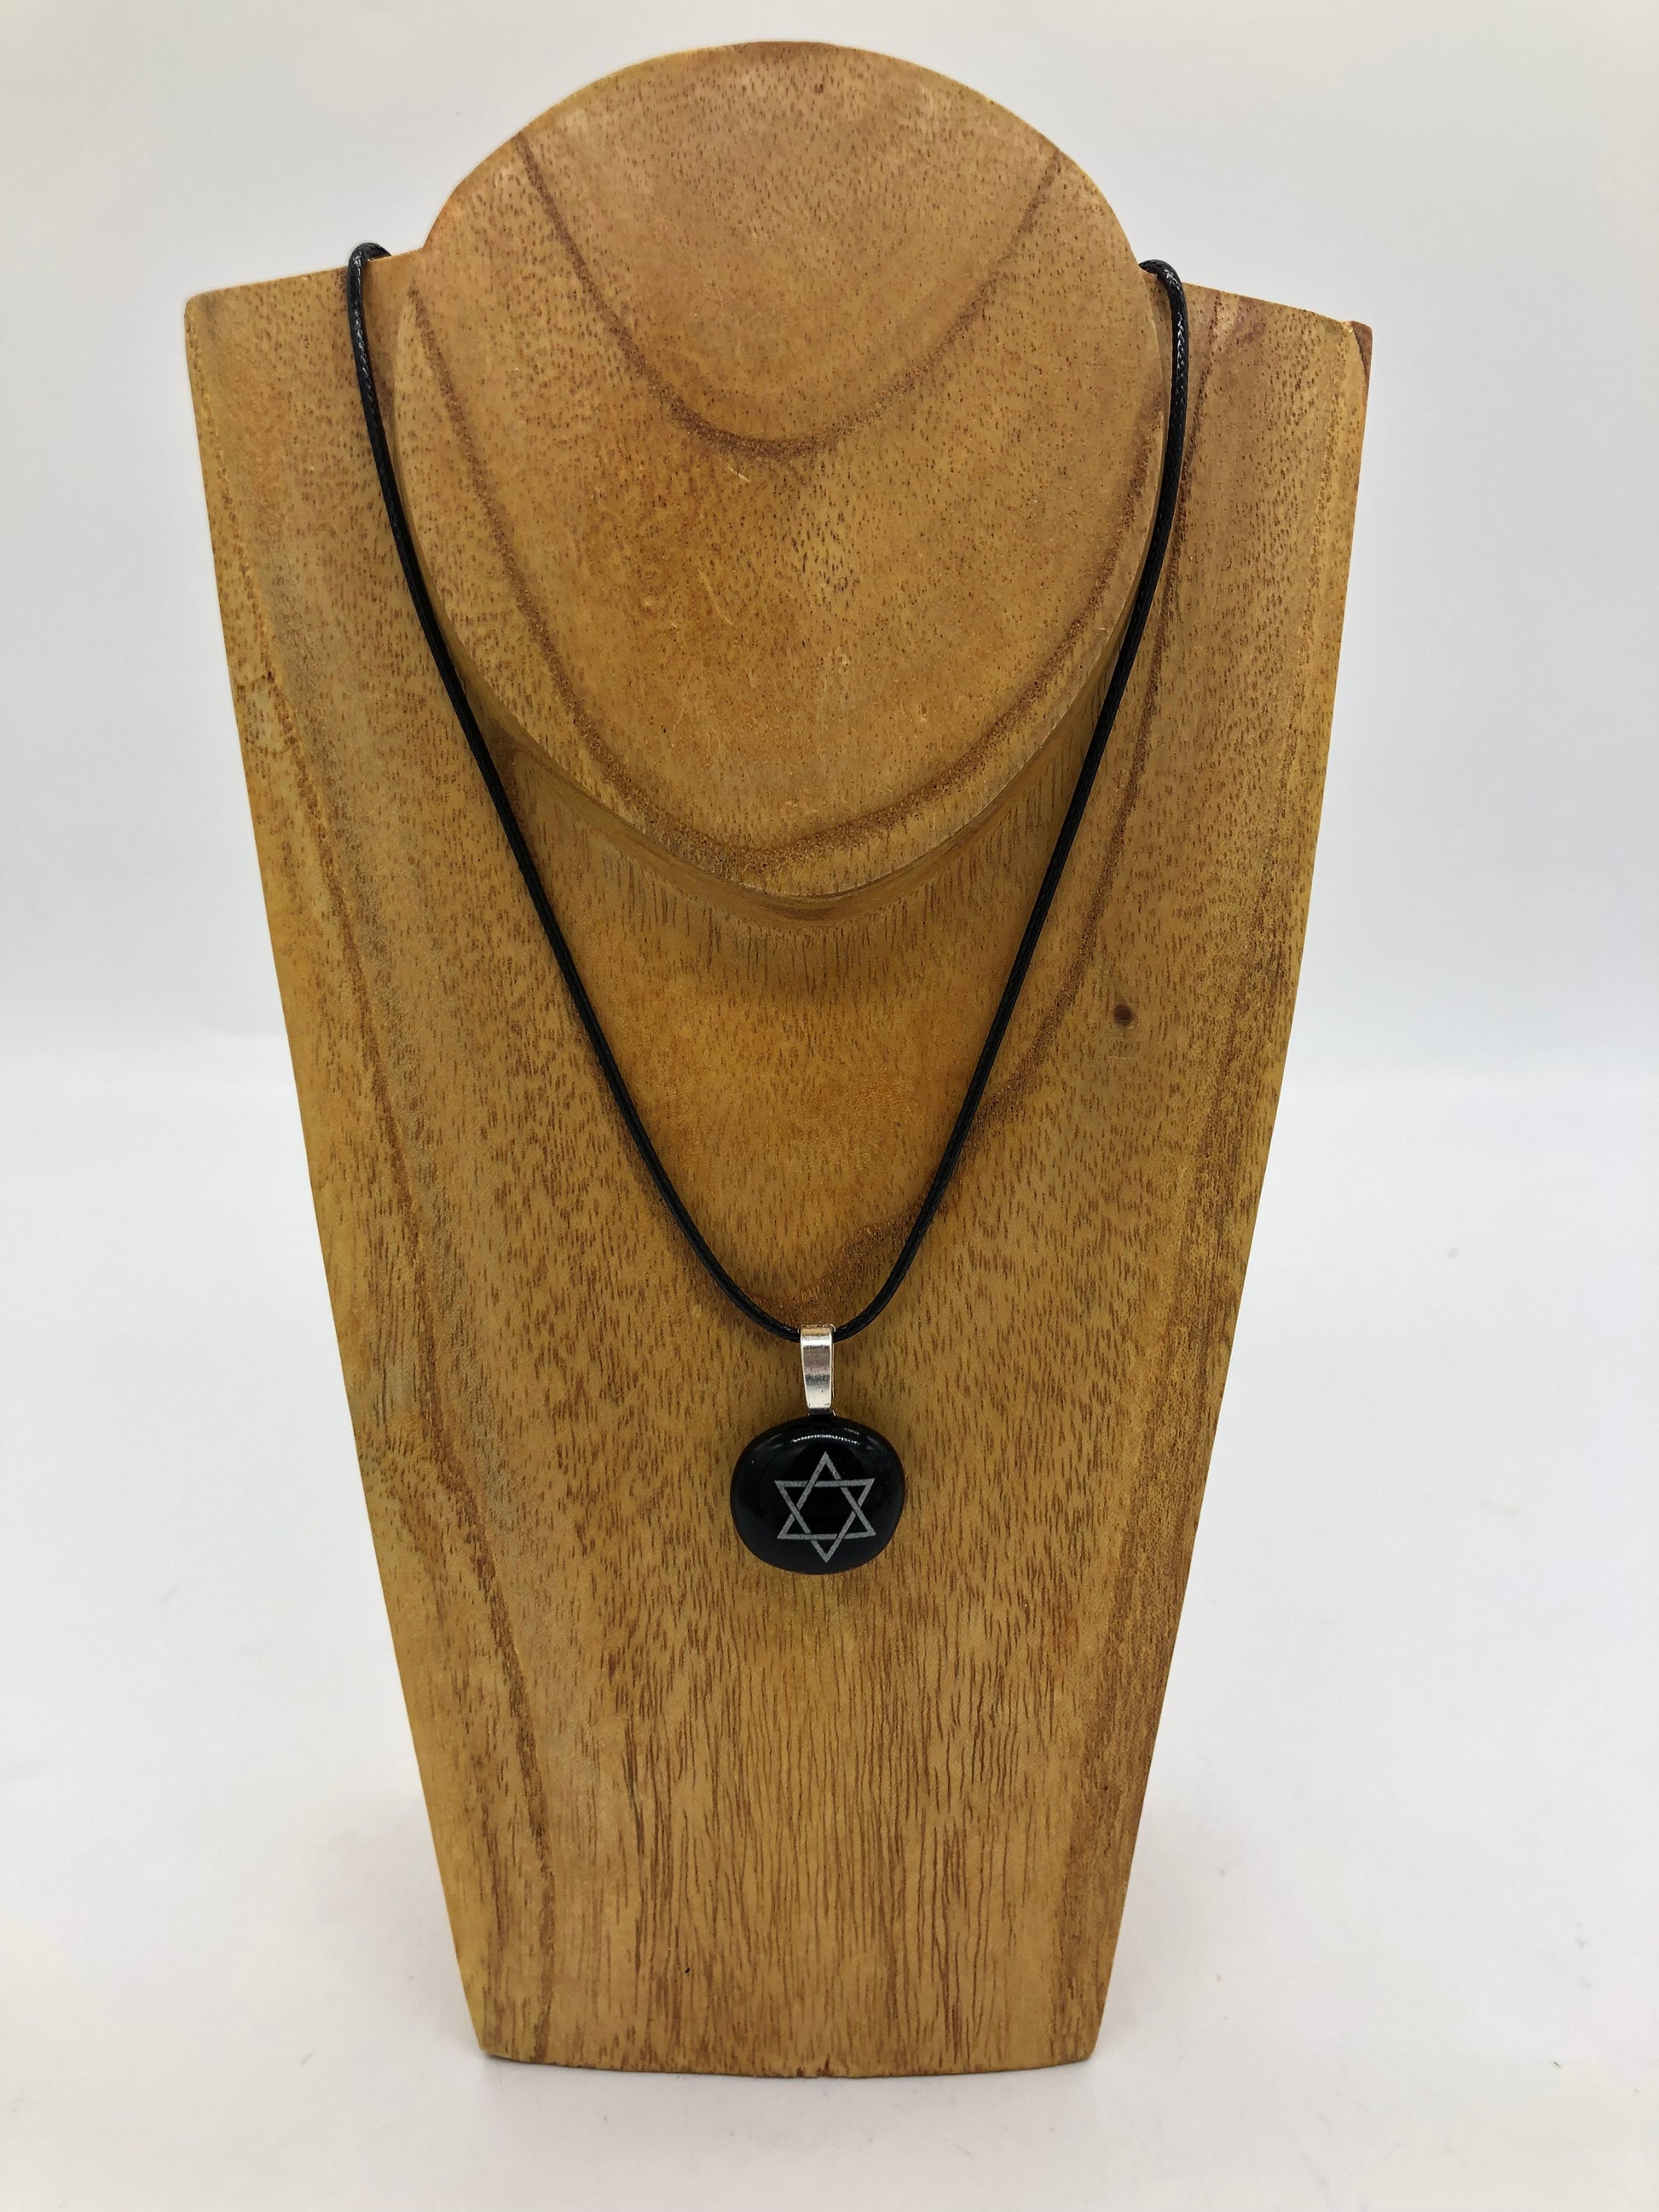 Fused glass necklace on a black cord, displayed on wooden holder.  Necklace design is a black circle with white star of David. 